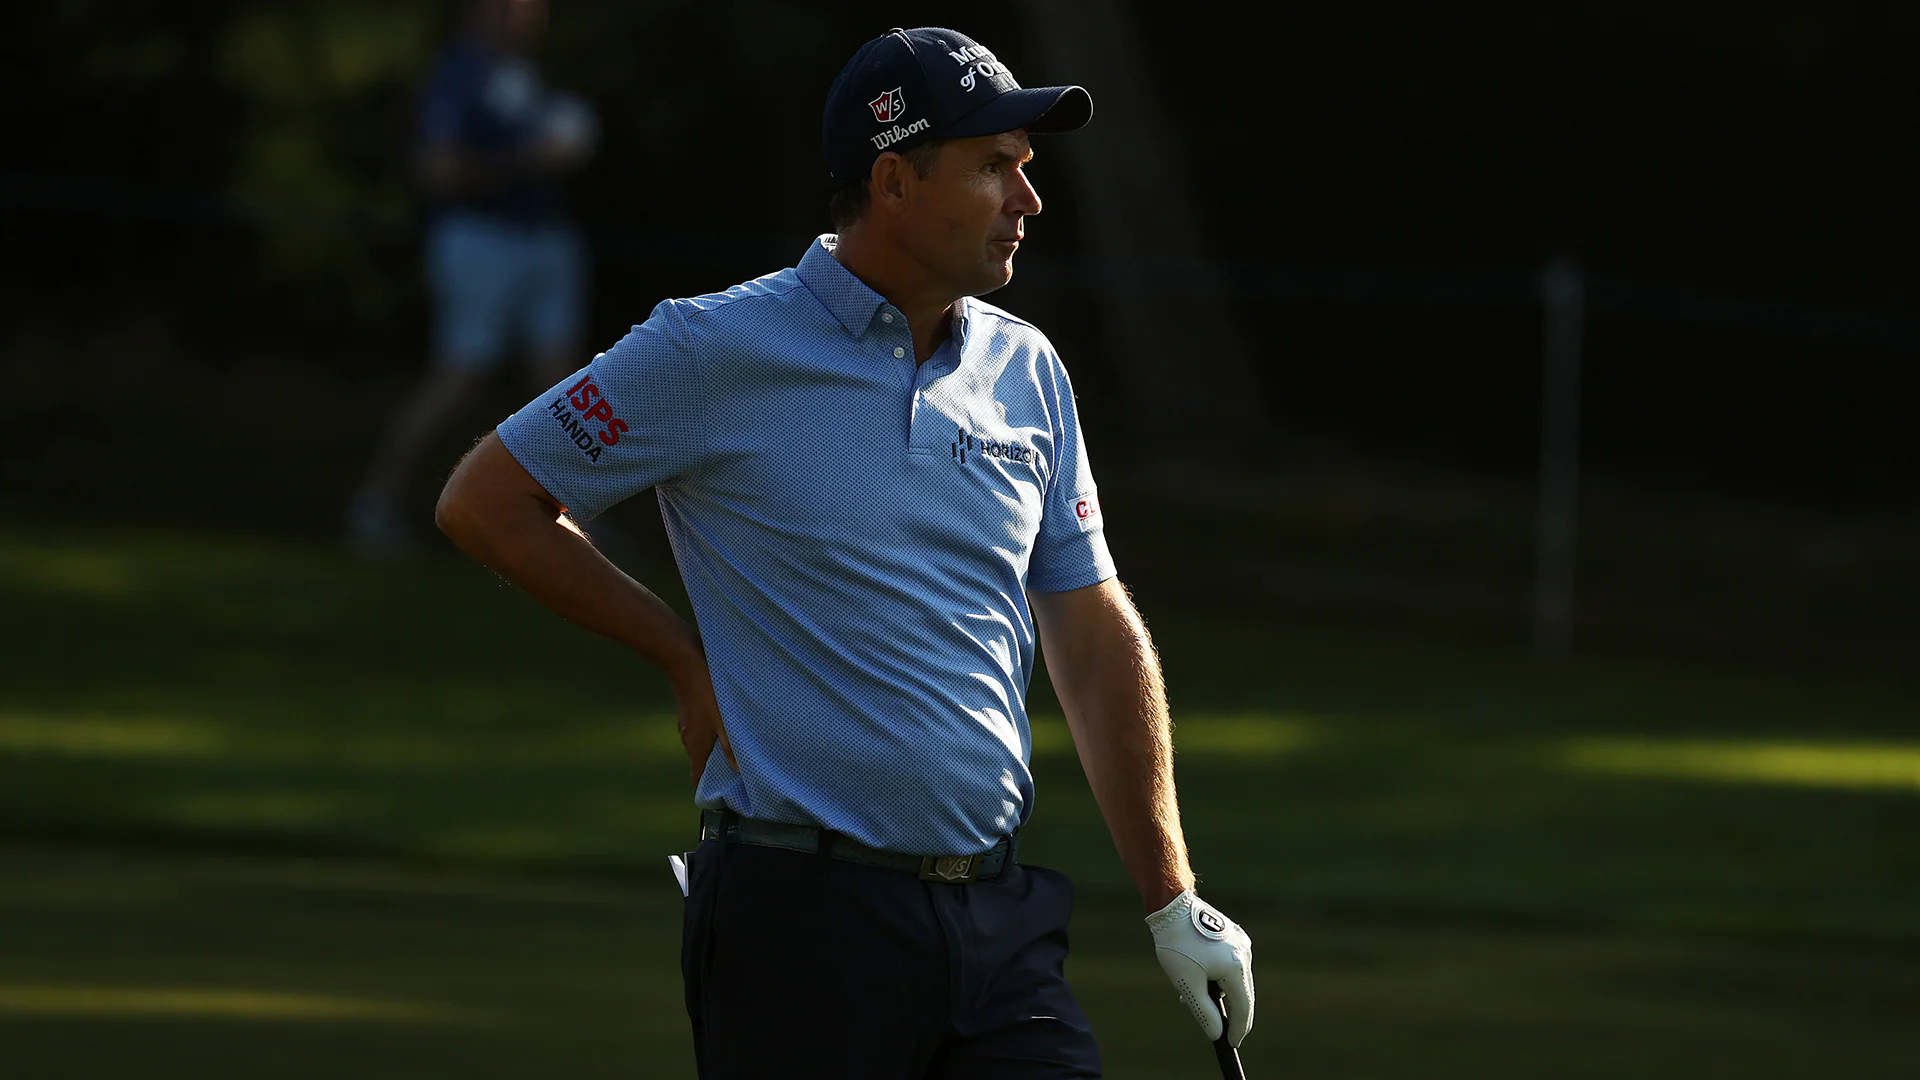 You want drama?! European Ryder Cup race nears finish line at BMW PGA